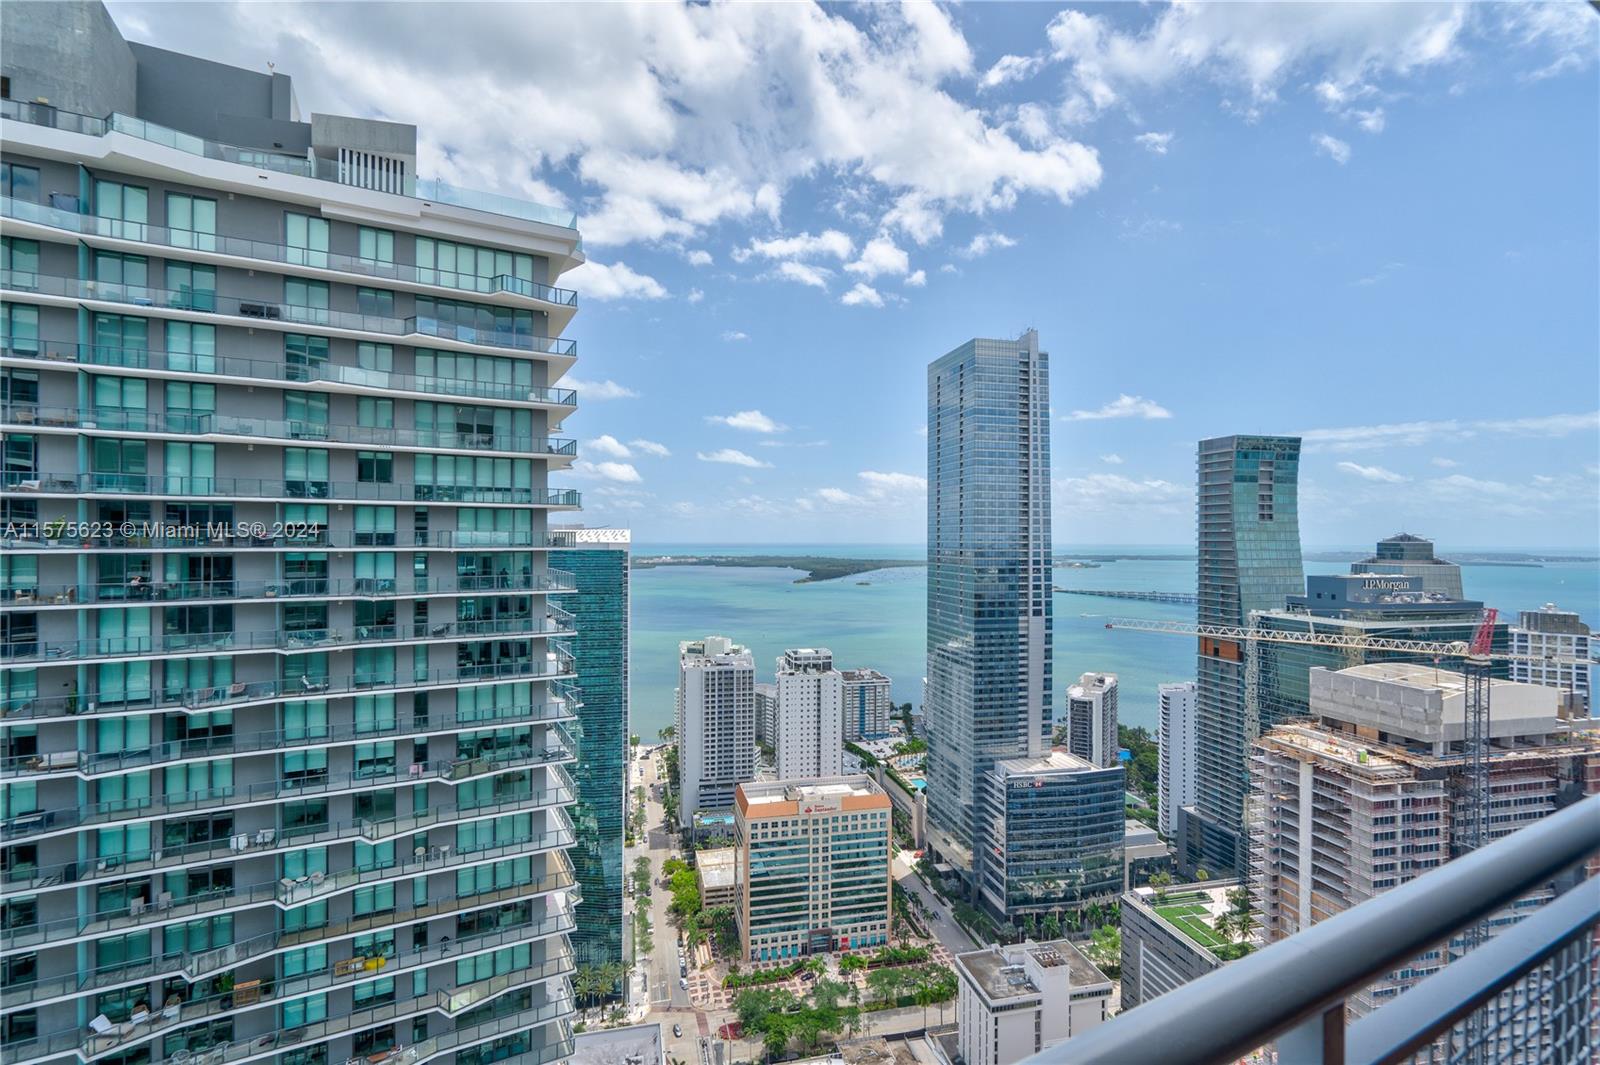 Welcome to this stunning loft with breathtaking views of Biscayne Bay and the Brickell Downtown skyline. This fully remodeled and beautifully designed furnished loft is ready for you to move in and start enjoying the luxury lifestyle it offers. Situated in the heart of Brickell, this prime location provides easy walking distance to the Brickell City Center and the vibrant Miami nightlife.Located on the 46th floor, this loft offers exclusive access to the terrace on the 50th floor, providing unparalleled panoramic views of the surrounding cityscape and waterfront. Reserved only for units on the 40th floor and above, this terrace offers a unique and private outdoor space to relax and entertain while enjoying the stunning city and bay views. Call me for a private tour! short term available.